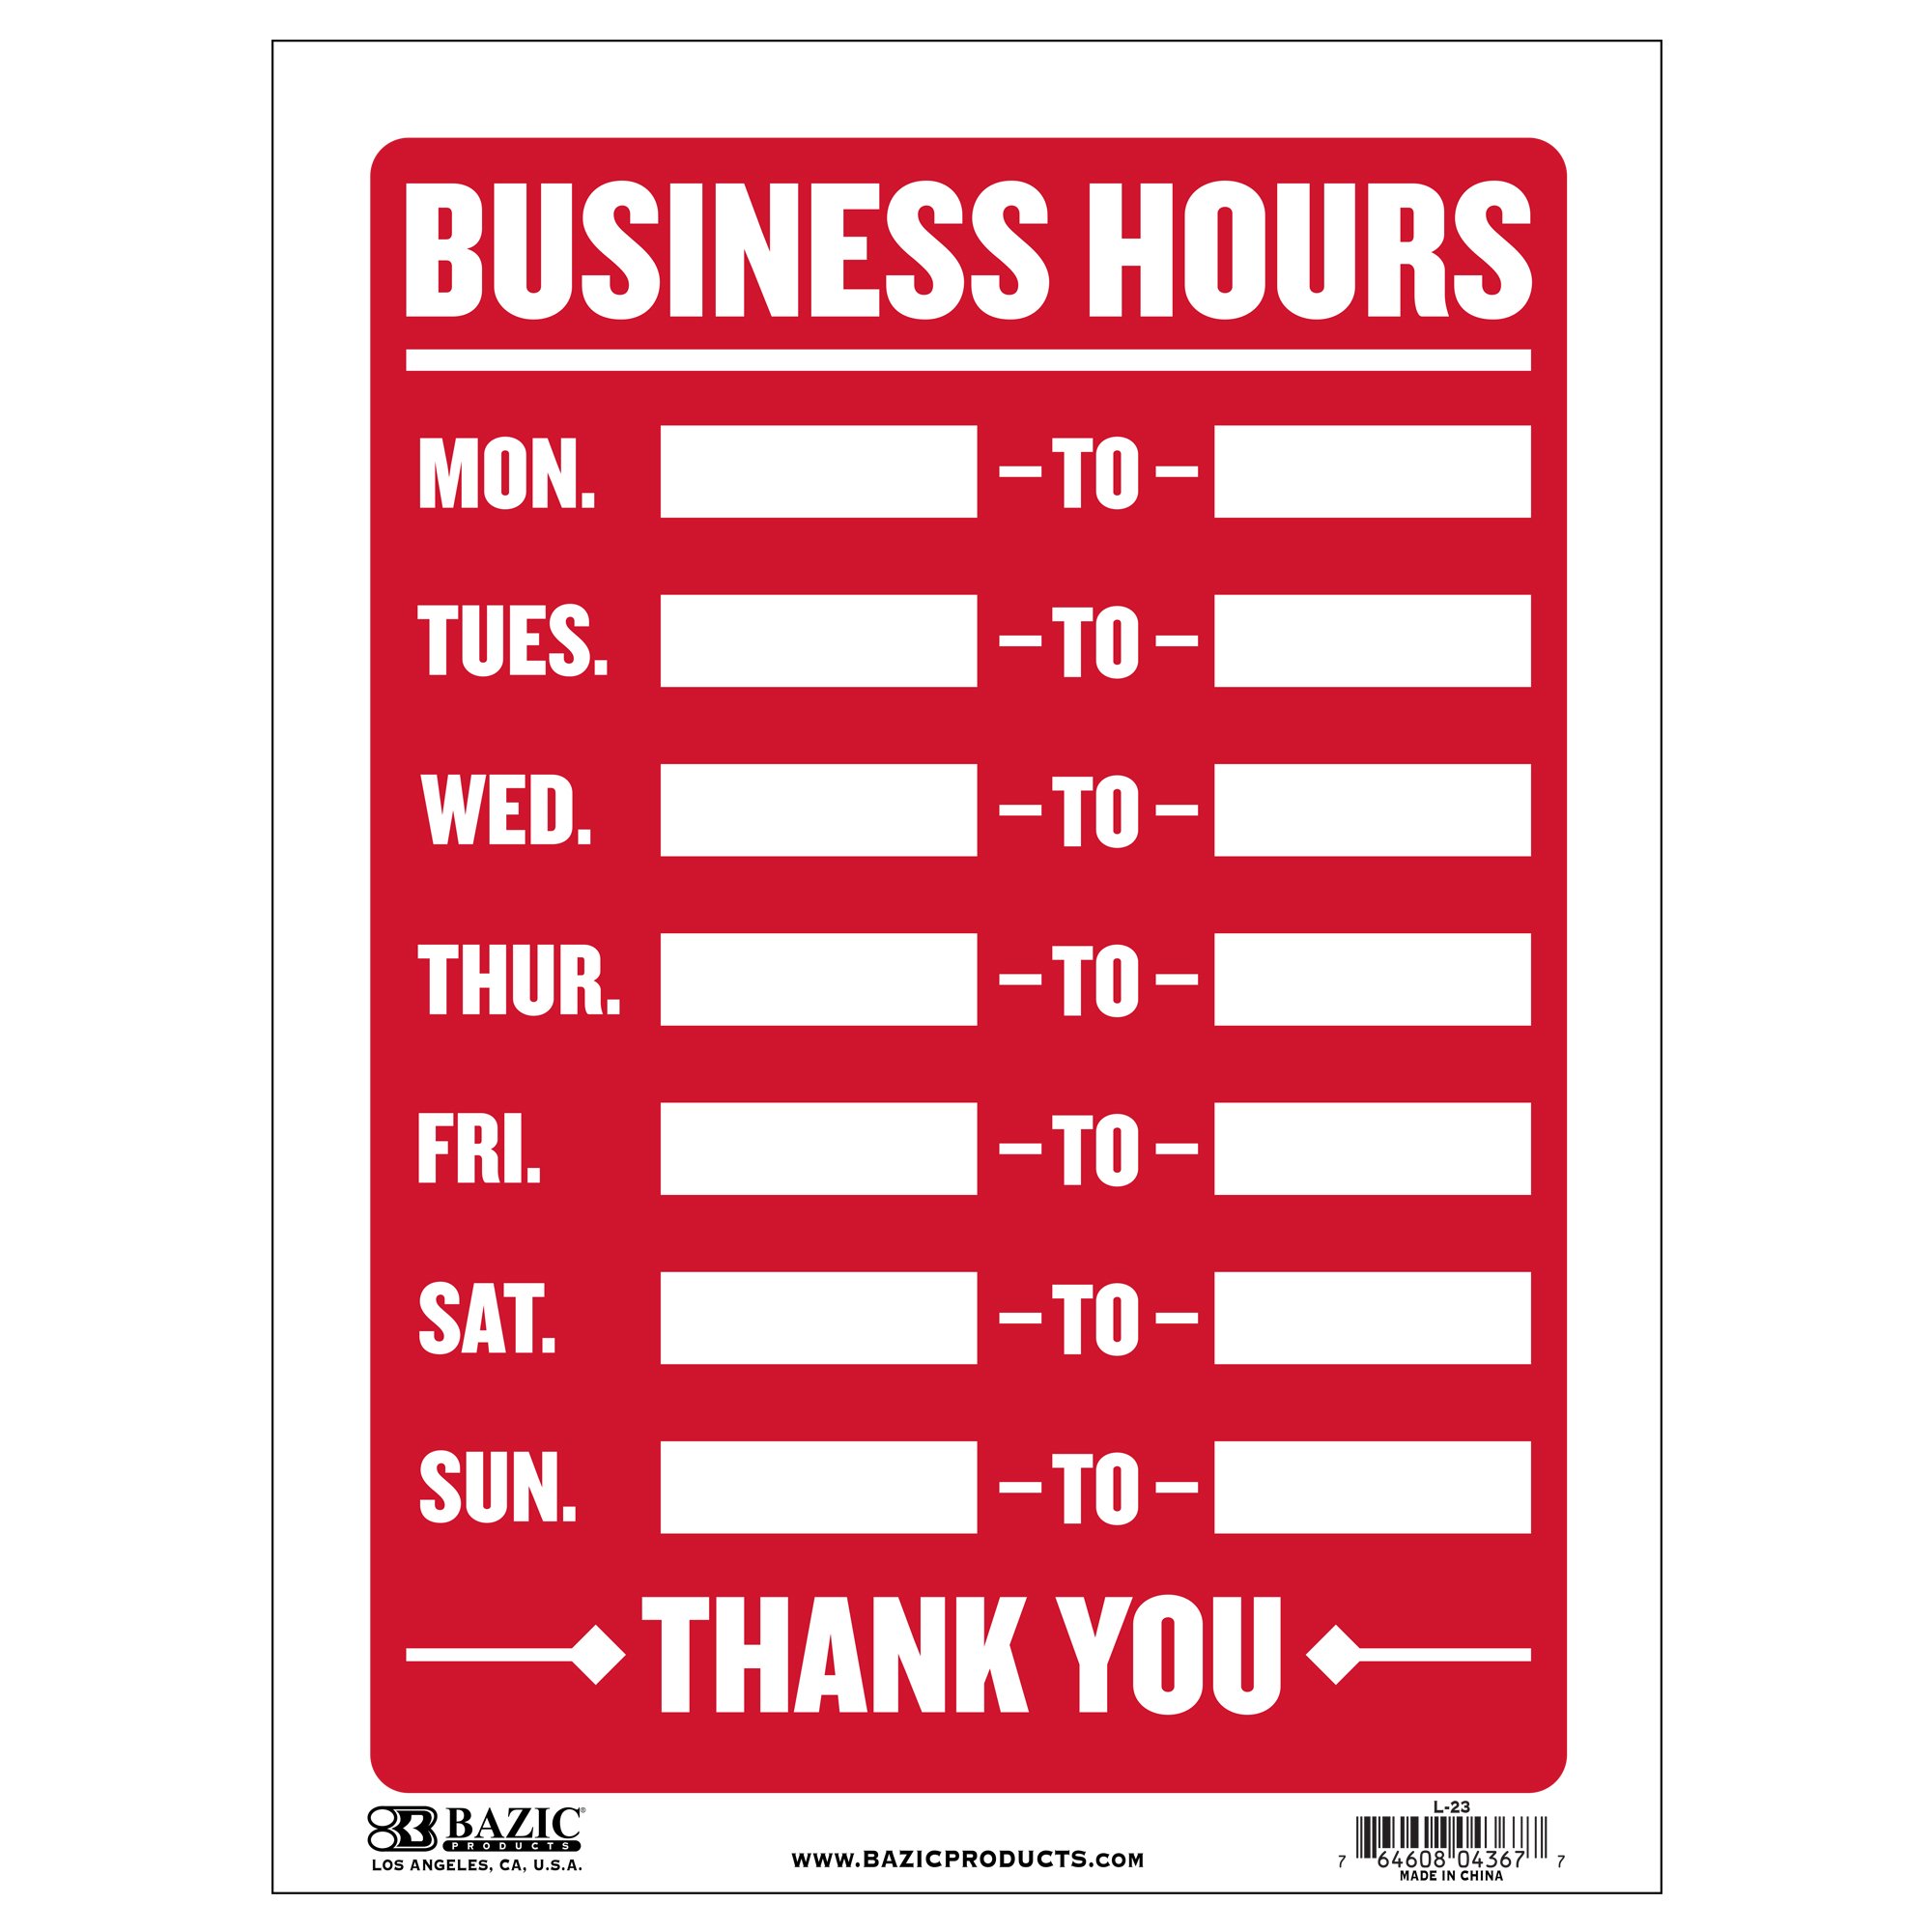 12-x-16-business-hours-sign-crown-office-supplies